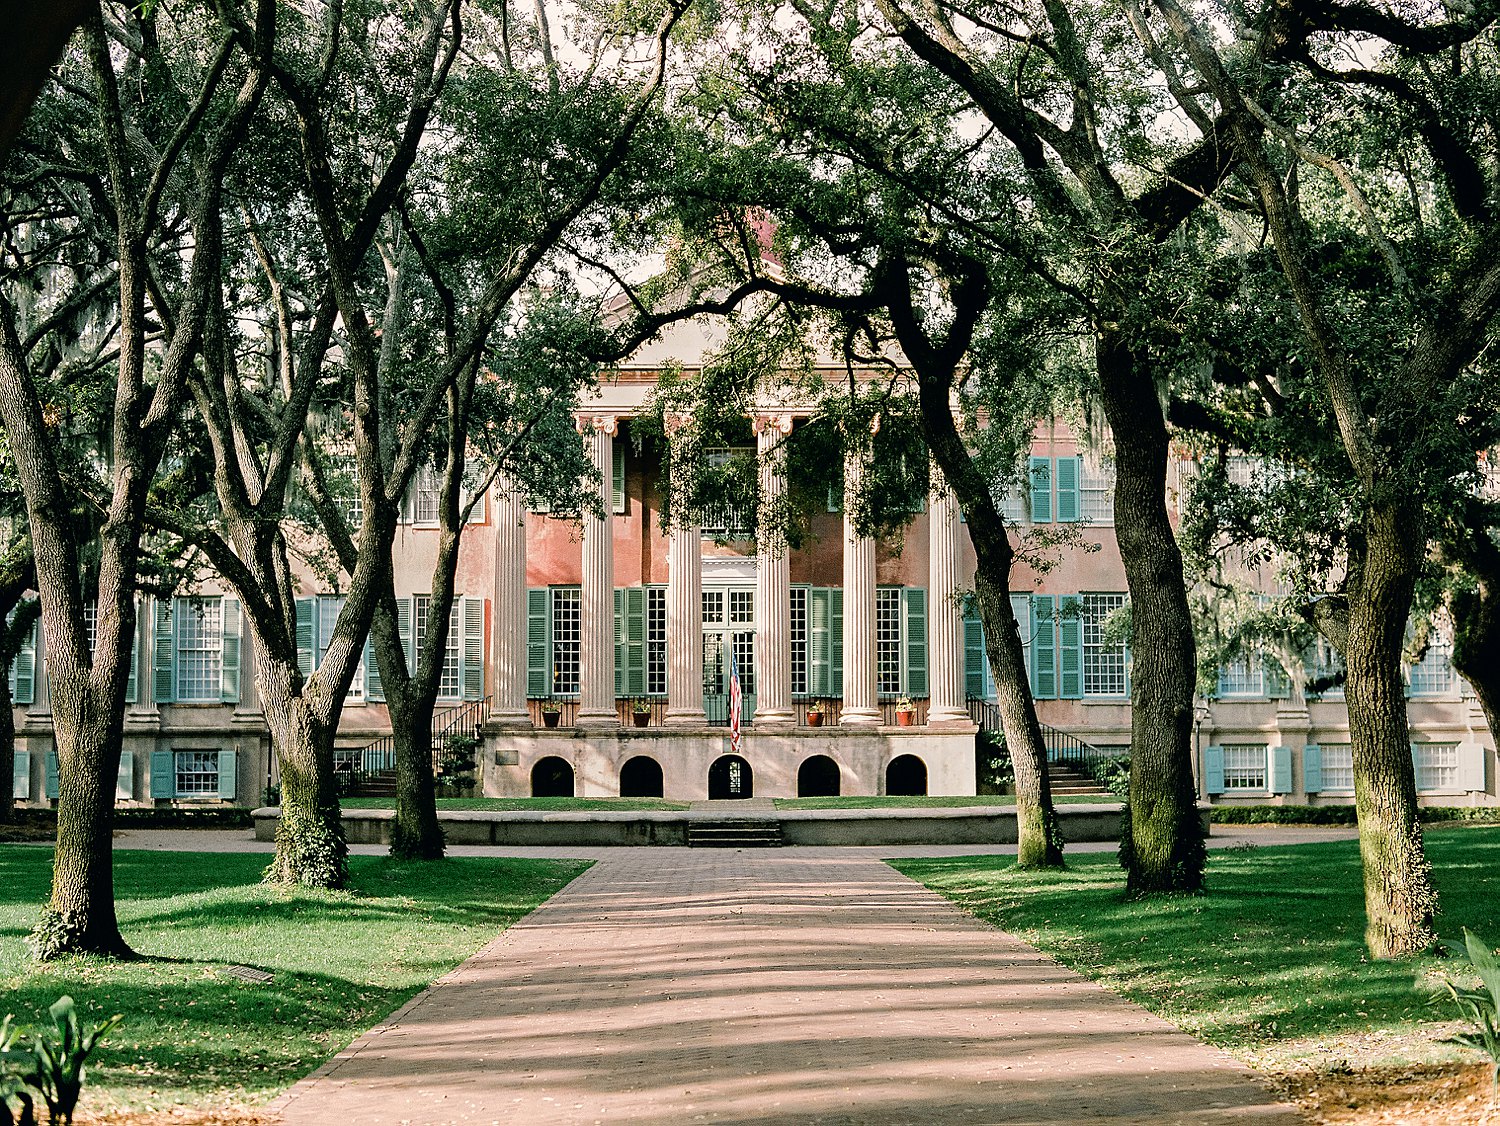 College of Charleston columned building surrounded by green trees